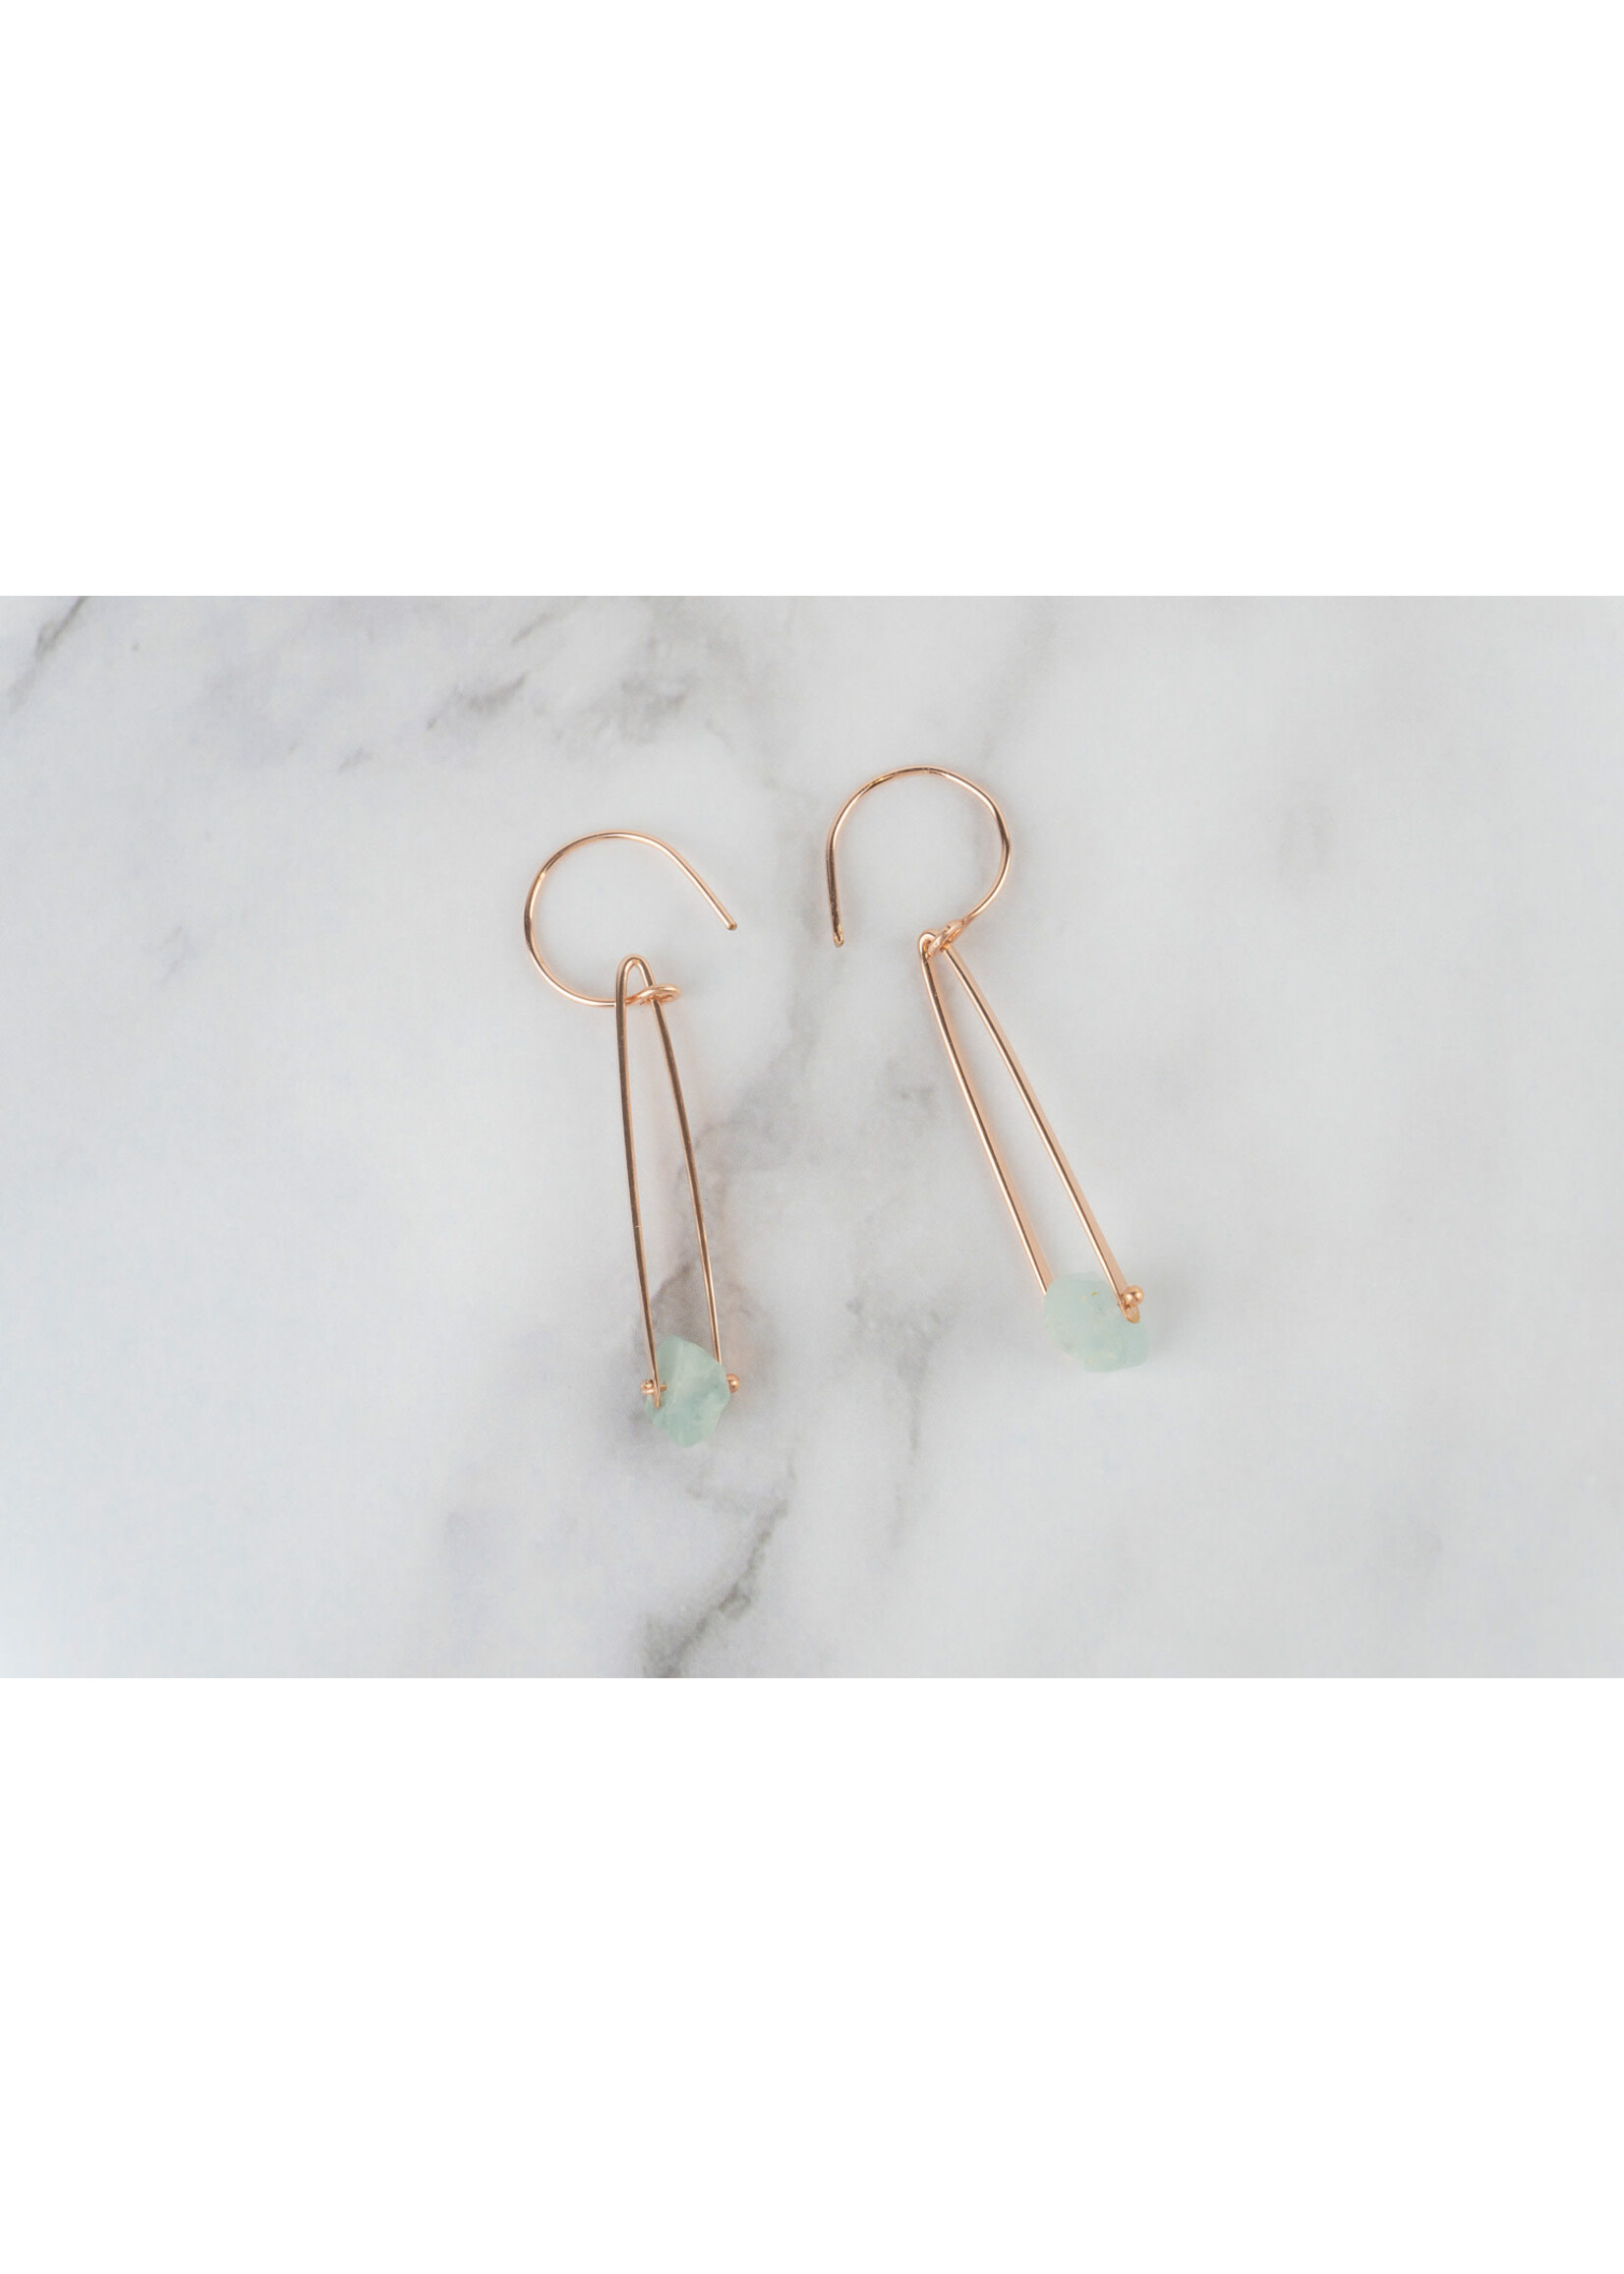 Cristy's Jewelry Designs Rose Gold Filled Raw Stone Drop Earrings